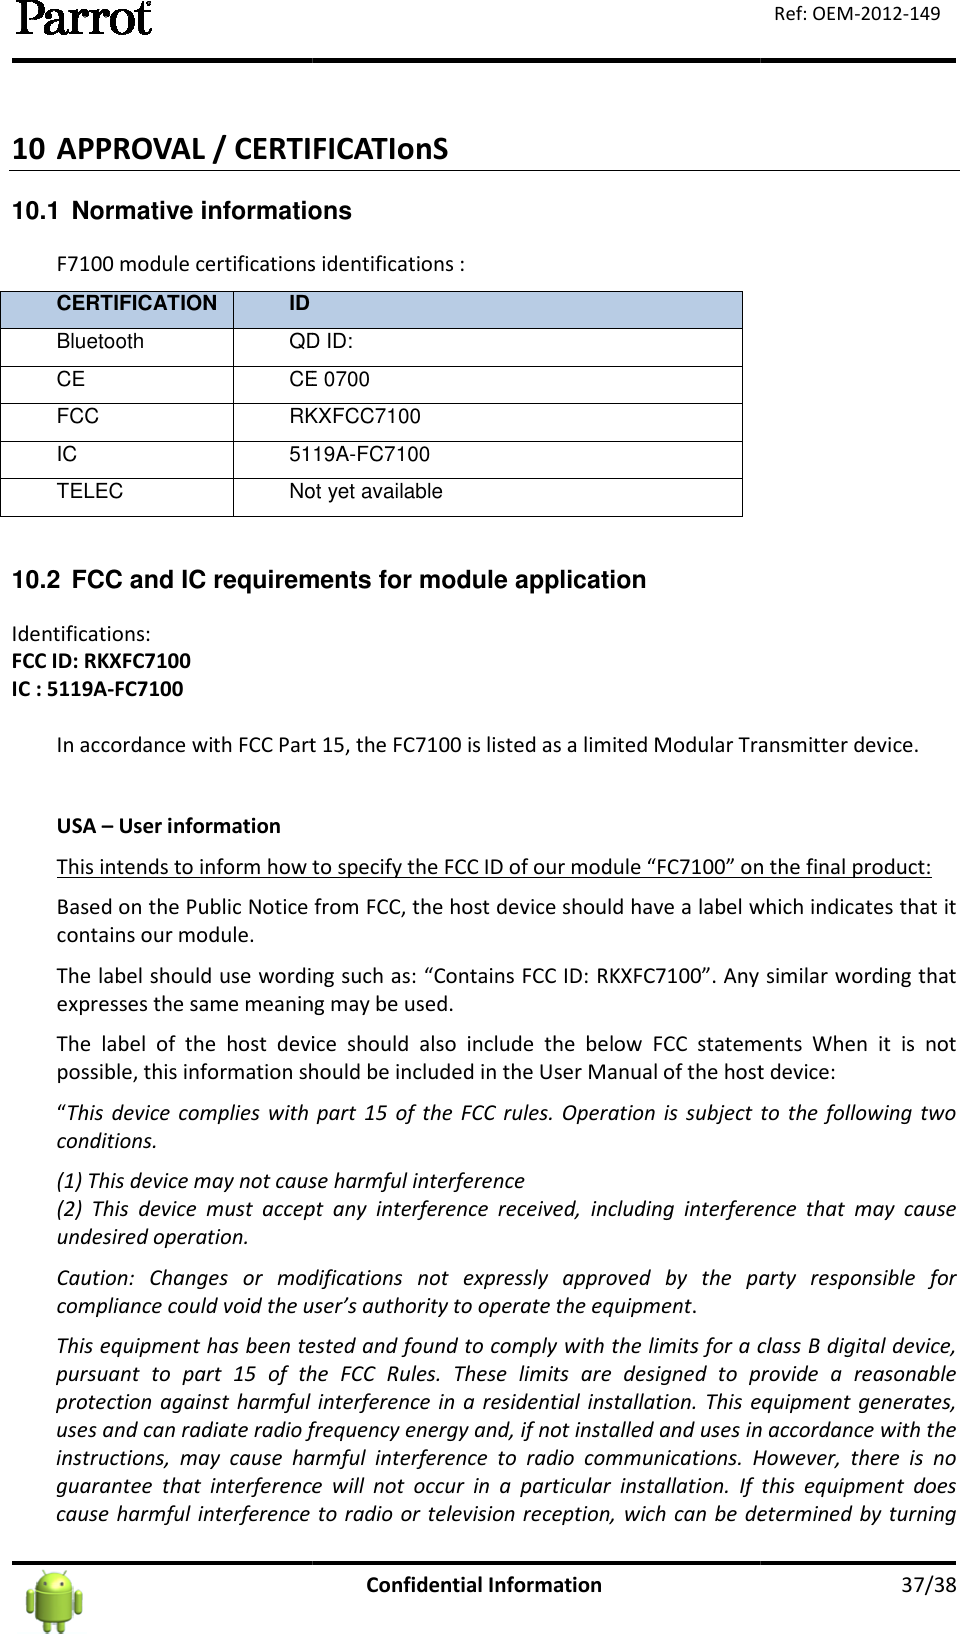   10 APPROVAL / CERTIFICATIonS 10.1  Normative informationsF7100 module certifications identifications :CERTIFICATION ID Bluetooth QD ID:CE CE 0700FCC RKXFCCIC 5119ATELEC Not yet available 10.2 FCC and IC requirements for module applicationIdentifications: FCC ID: RKXFC7100 IC : 5119A-FC7100  In accordance with FCC Part 15, the FC USA – User information This intends to inform how to specify the FCC ID of our module “FCBased on the Public Notice from FCC, the host dcontains our module. The label should use wording such as: “Contains FCC ID: RKXFCexpresses the same meaning may be used.The  label  of  the  host  device  should  also  include  thepossible, this information should be included in the“This  device  complies with part  15  of  the FCC  rules.  Operation  is subject  to the following  two conditions. (1) This device may not cause harmful interference(2)  This  device  must  accept  any  interference  received,  including  interference  that  may  cause undesired operation. Caution:  Changes  or  modifications  not  expressly  approved  by  the  party  responsible  for compliance could void the user’sThis equipment has been tested and found to comply with the limits for a class B digital device, pursuant  to  part  15  of  the  FCC  Rules.  These  limits  are  designed  to  provide  a  reasonable protection against harmful interference  in  a residential installation. uses and can radiate radio frequency energy and, if not installed and uses in accordance with the instructions,  may  cause  harmful  interference  to  radio  communications.  However,  there  is  no guarantee  that  interference  will  not  occucause harmful  interference to  radio or television reception, wich can be determined by turning Confidential Information APPROVAL / CERTIFICATIonS  informations 100 module certifications identifications :  QD ID: CE 0700 RKXFCC7100 5119A-FC7100 Not yet available FCC and IC requirements for module application accordance with FCC Part 15, the FC7100 is listed as a limited Modular Transmitter device.This intends to inform how to specify the FCC ID of our module “FC7100” on the final product:Based on the Public Notice from FCC, the host device should have a label which indicates that it The label should use wording such as: “Contains FCC ID: RKXFC7100”. Any similar wording that expresses the same meaning may be used. The  label  of  the  host  device  should  also  include  the below  FCC  statements  When  it  is  not possible, this information should be included in the User Manual of the host deviceThis  device  complies with part  15  of  the FCC  rules.  Operation  is subject  to the following  two se harmful interference (2)  This  device  must  accept  any  interference  received,  including  interference  that  may  cause Caution:  Changes  or  modifications  not  expressly  approved  by  the  party  responsible  for compliance could void the user’s authority to operate the equipment. This equipment has been tested and found to comply with the limits for a class B digital device, pursuant  to  part  15  of  the  FCC  Rules.  These  limits  are  designed  to  provide  a  reasonable protection against harmful interference  in  a residential installation. This equipment  generates, uses and can radiate radio frequency energy and, if not installed and uses in accordance with the instructions,  may  cause  harmful  interference  to  radio  communications.  However,  there  is  no guarantee  that  interference  will  not  occur  in  a  particular  installation.  If  this  equipment  does cause harmful  interference to  radio or television reception, wich can be determined by turning   37/38 Ref: OEM-2012-149 100 is listed as a limited Modular Transmitter device. 100” on the final product: evice should have a label which indicates that it 100”. Any similar wording that below  FCC  statements  When  it  is  not User Manual of the host device: This  device  complies with part  15  of  the FCC  rules.  Operation  is subject  to the following  two (2)  This  device  must  accept  any  interference  received,  including  interference  that  may  cause Caution:  Changes  or  modifications  not  expressly  approved  by  the  party  responsible  for This equipment has been tested and found to comply with the limits for a class B digital device, pursuant  to  part  15  of  the  FCC  Rules.  These  limits  are  designed  to  provide  a  reasonable This equipment  generates, uses and can radiate radio frequency energy and, if not installed and uses in accordance with the instructions,  may  cause  harmful  interference  to  radio  communications.  However,  there  is  no .  If  this  equipment  does cause harmful  interference to  radio or television reception, wich can be determined by turning 